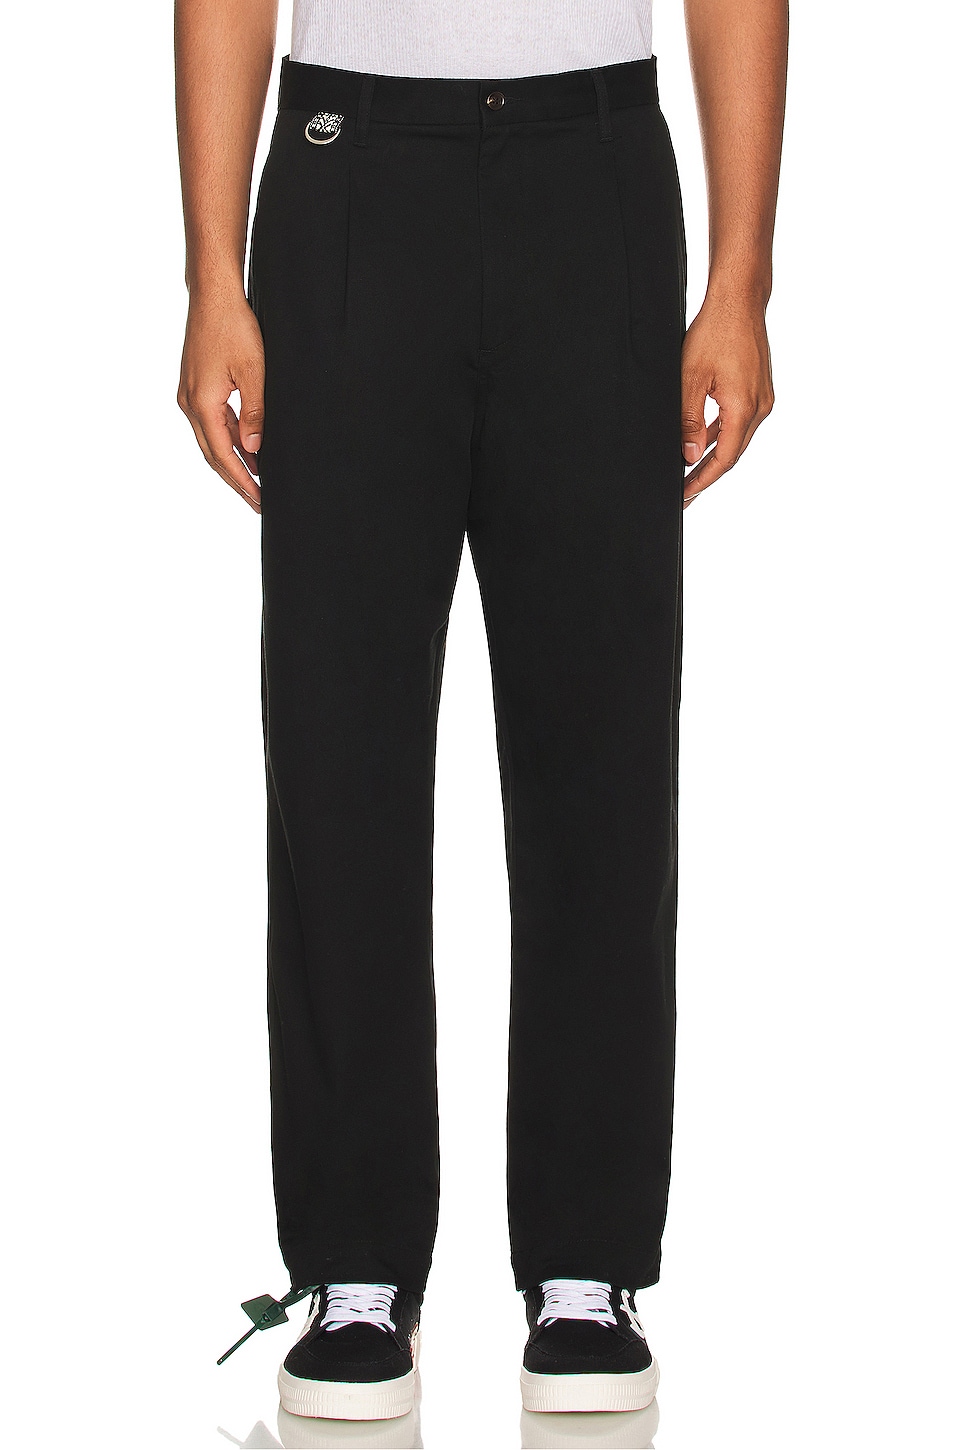 Image 1 of DOUBLE RAINBOUU Paradise Pant in Contrast Black